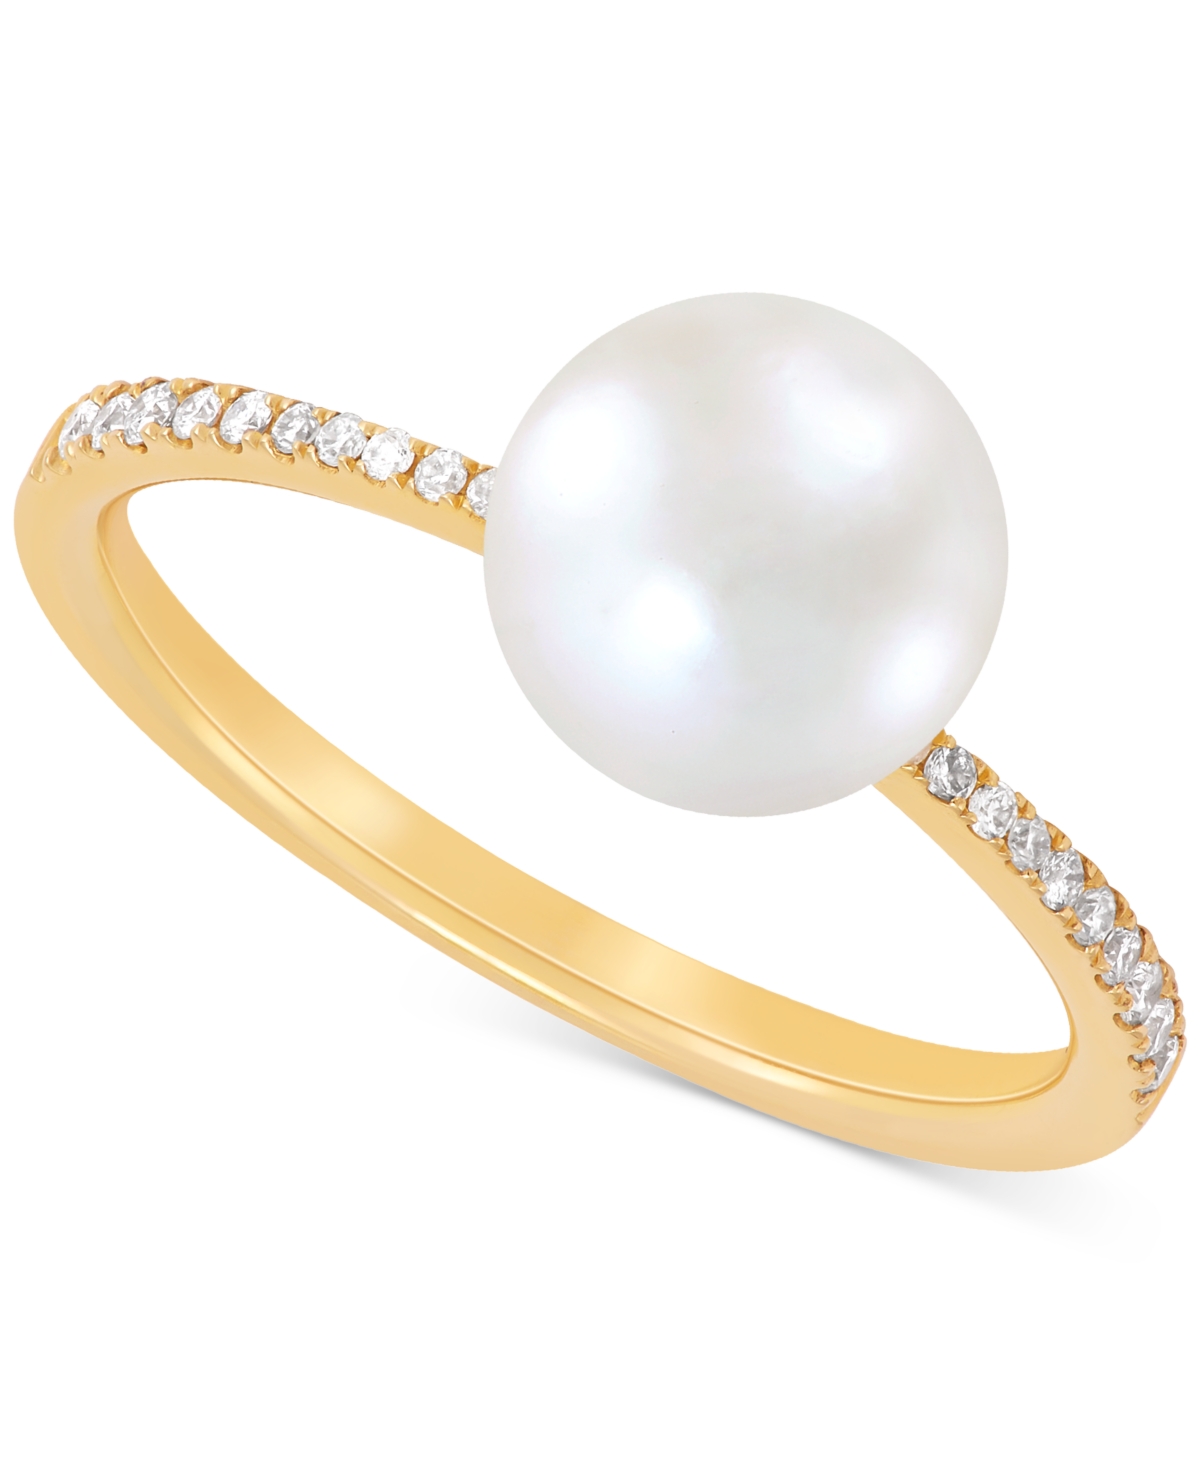 Cultured Freshwater Pearl (8mm) & Diamond (1/10 ct. t.w.) Ring in 10k Gold - Yellow Gold